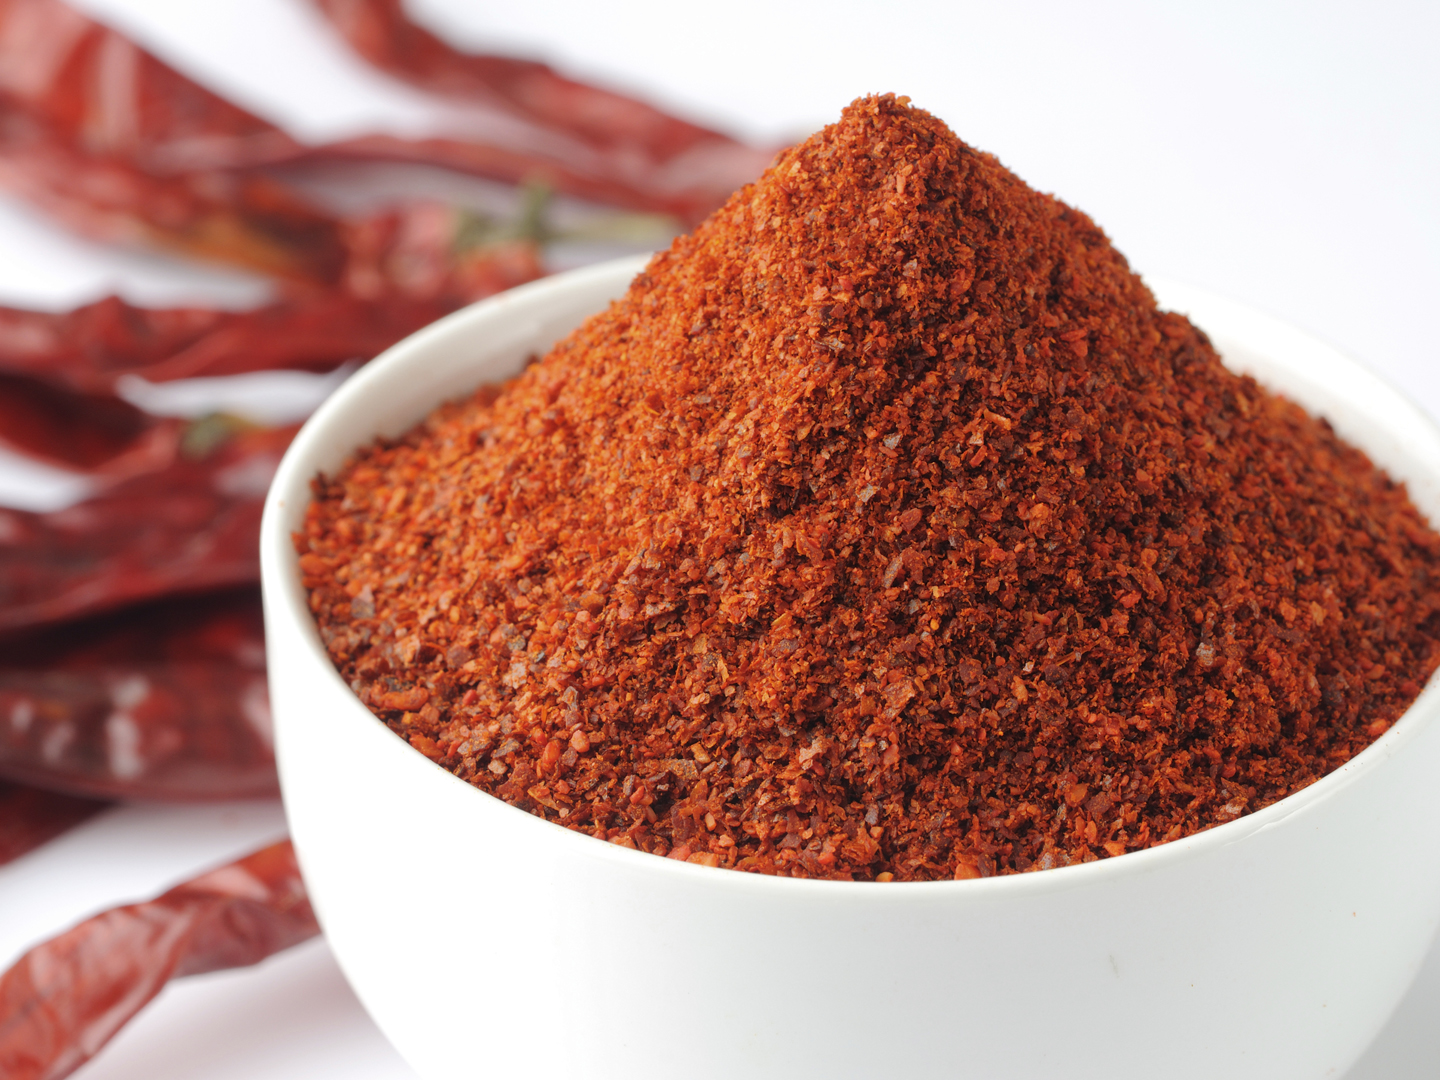 Capsaicin Pepper for Pain? Ask Dr. Weil